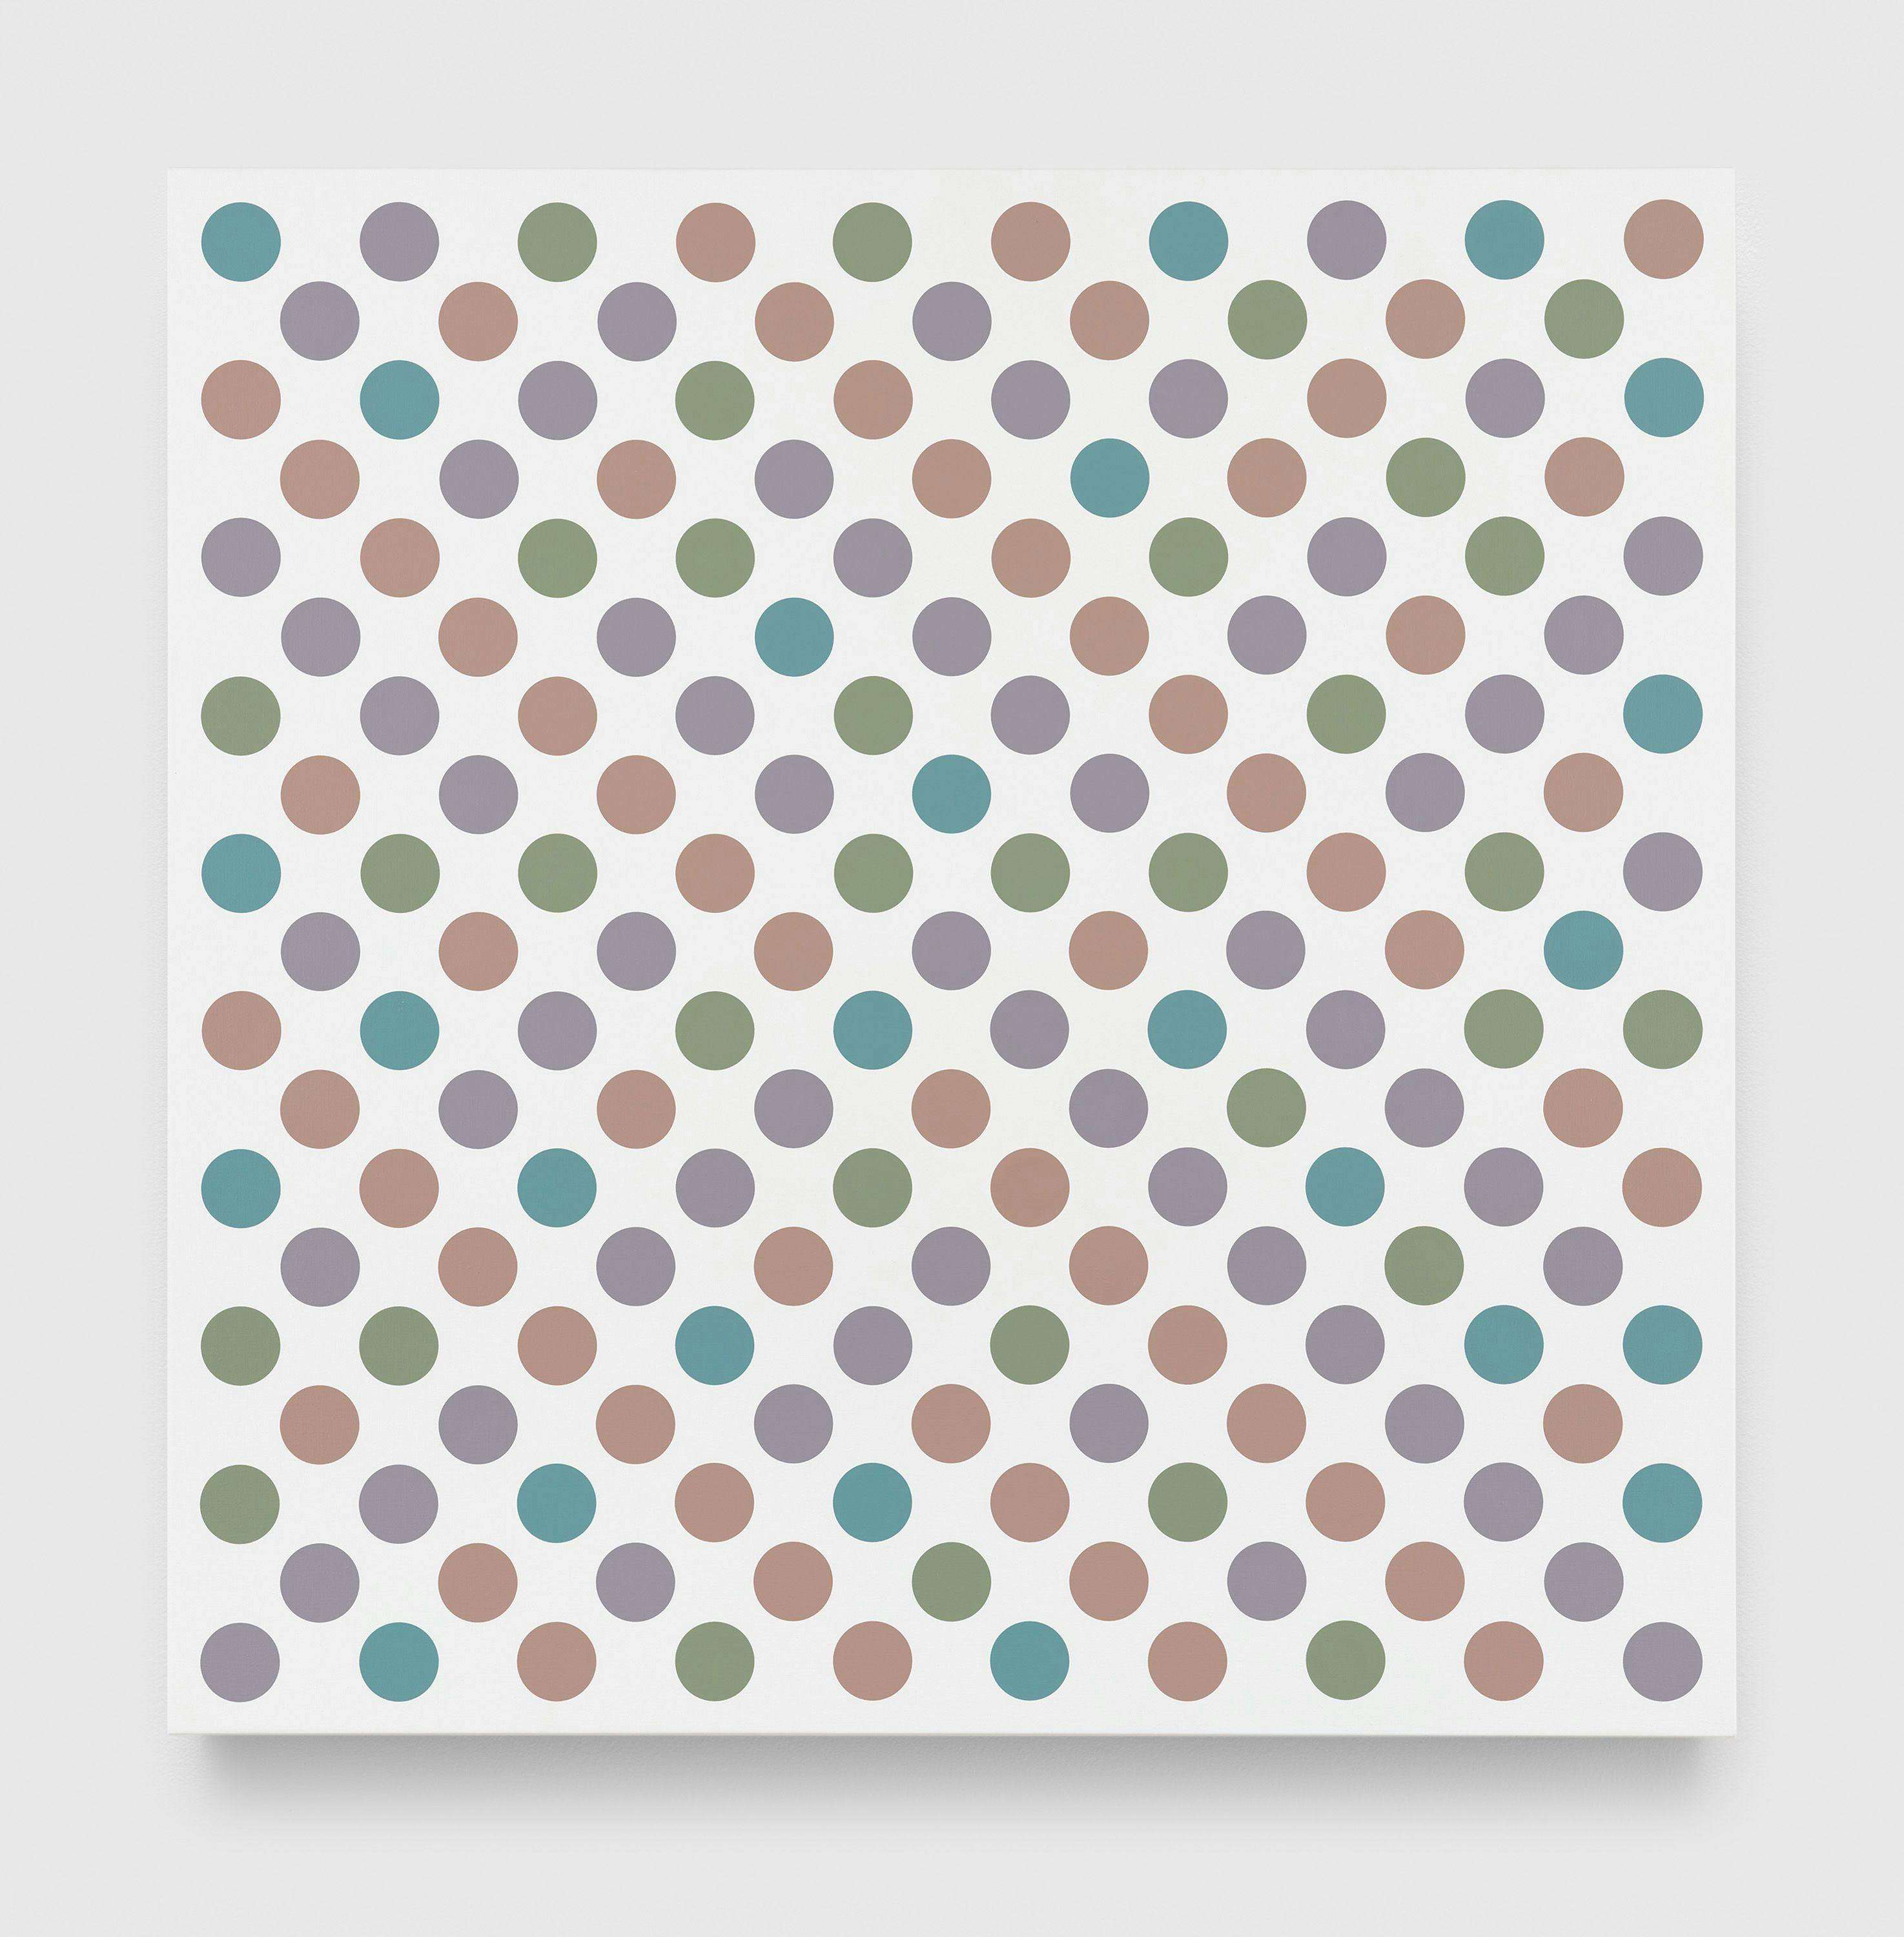 A painting by Bridget Riley, titled Measure for Measure 45, dated 2020.